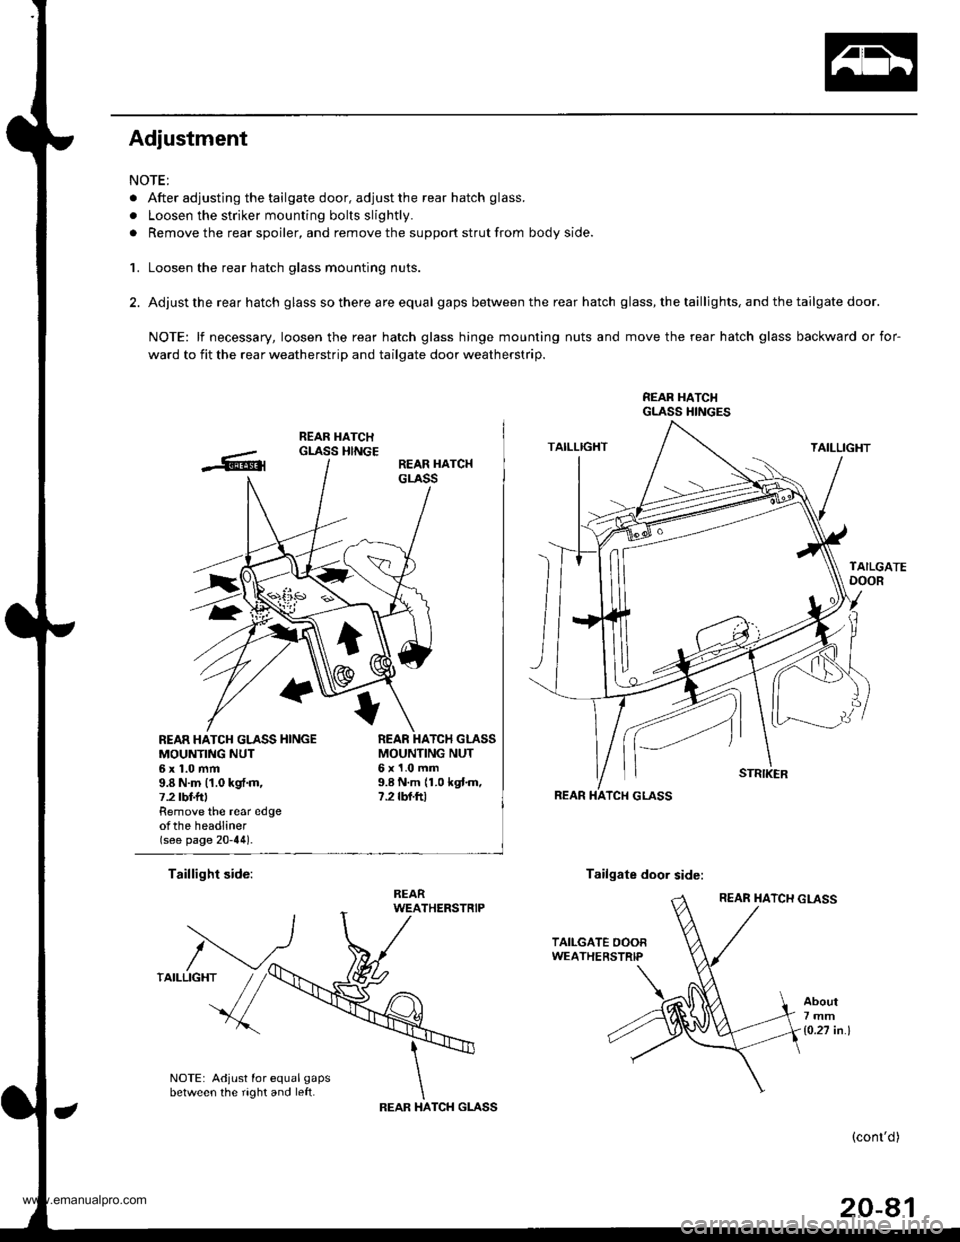 HONDA CR-V 1999 RD1-RD3 / 1.G Workshop Manual 
Adjustment
NOTE:
. After adjusting the tailgate door, adjust the rear hatch glass.
. Loosen the striker mounting bolts slightly.
. Remove the rear spoiler, and remove the support strut from body side